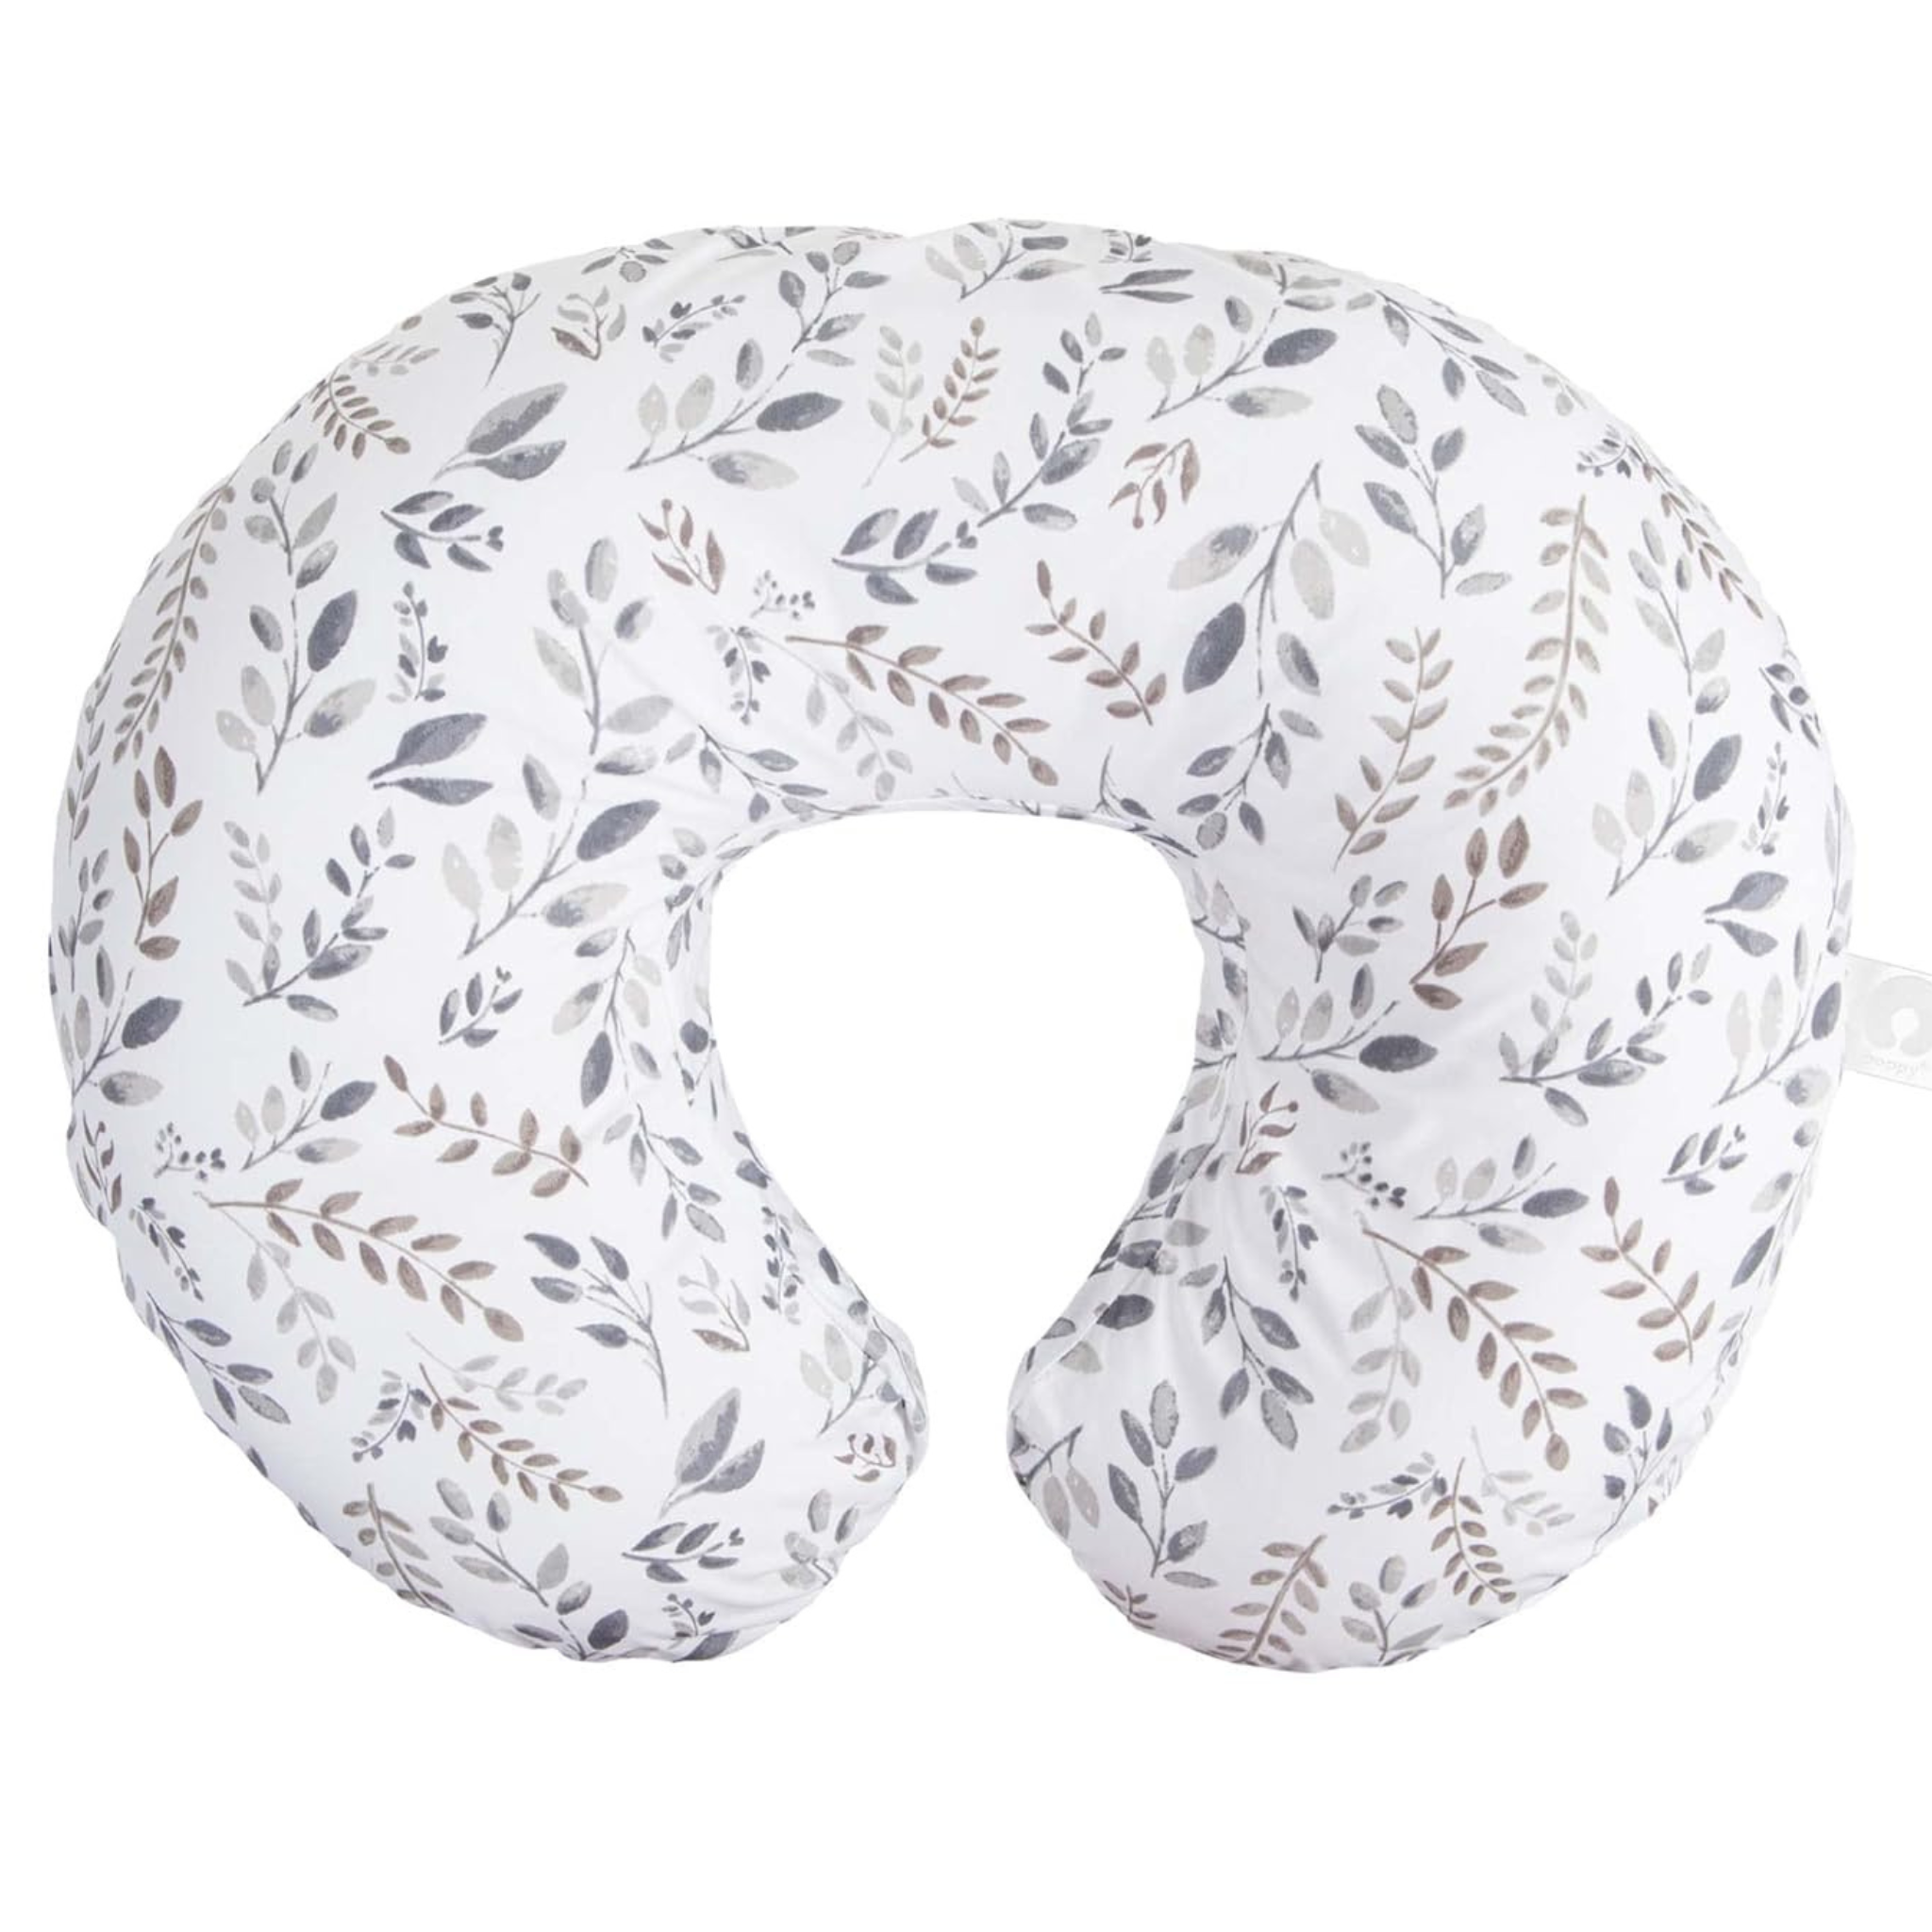 Boppy Pillow with Removable Nursing Pillow Cover, Gray Taupe Leaves